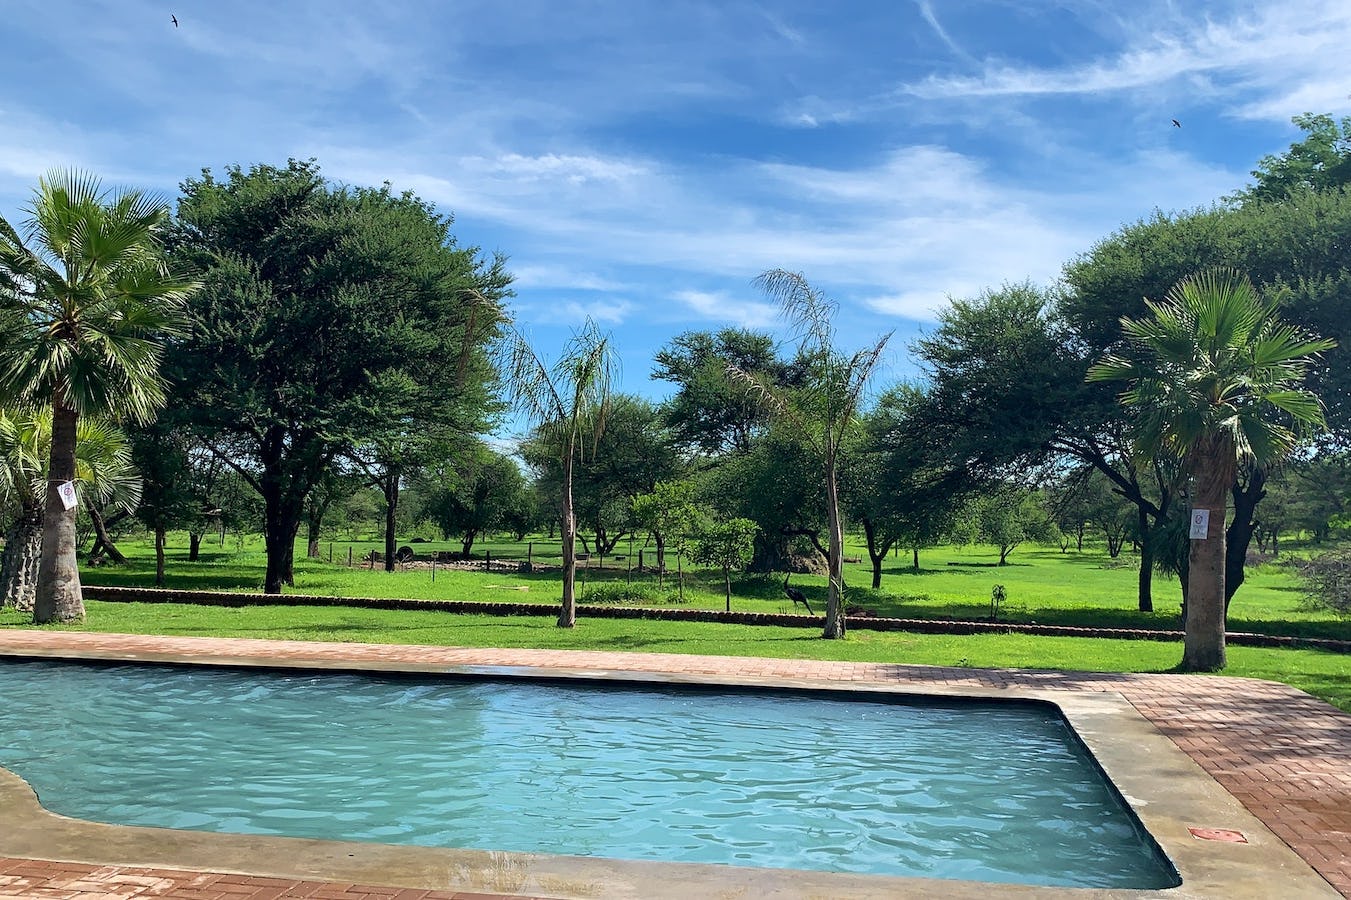 Otjibamba Lodge is a well-known and –loved stop over en route to Etosha National Park, a mere 180km away. Although the property is situated only 4km outside of Otjiwarongo, it is tucked away in the bush and completely isolated and quiet as if you...